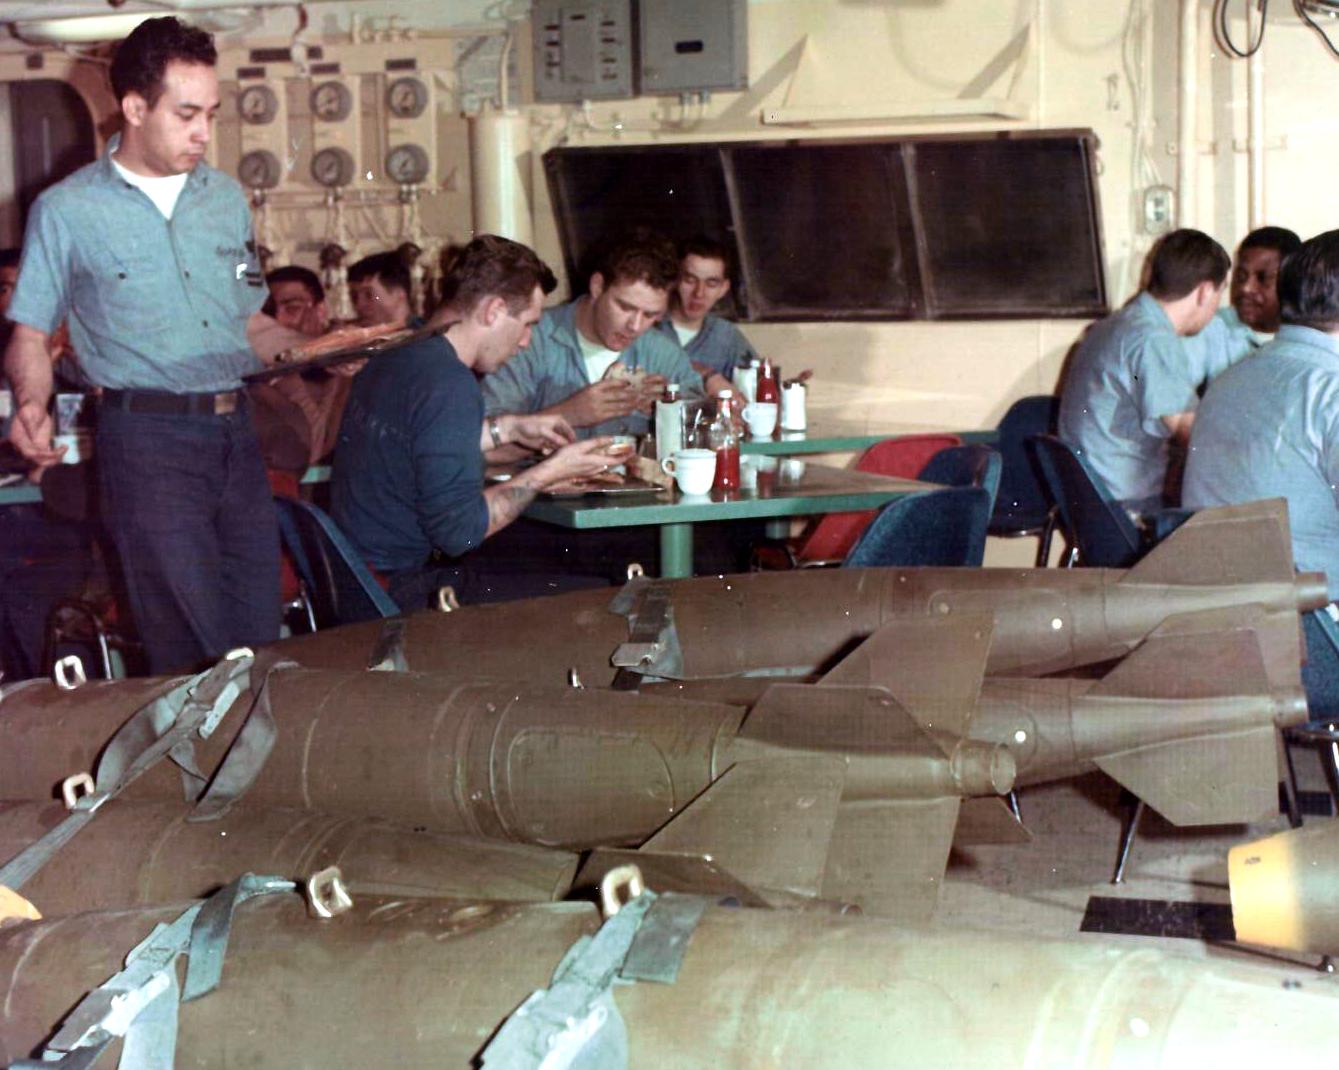 uss enterprise sailors eating lunch next to bombs